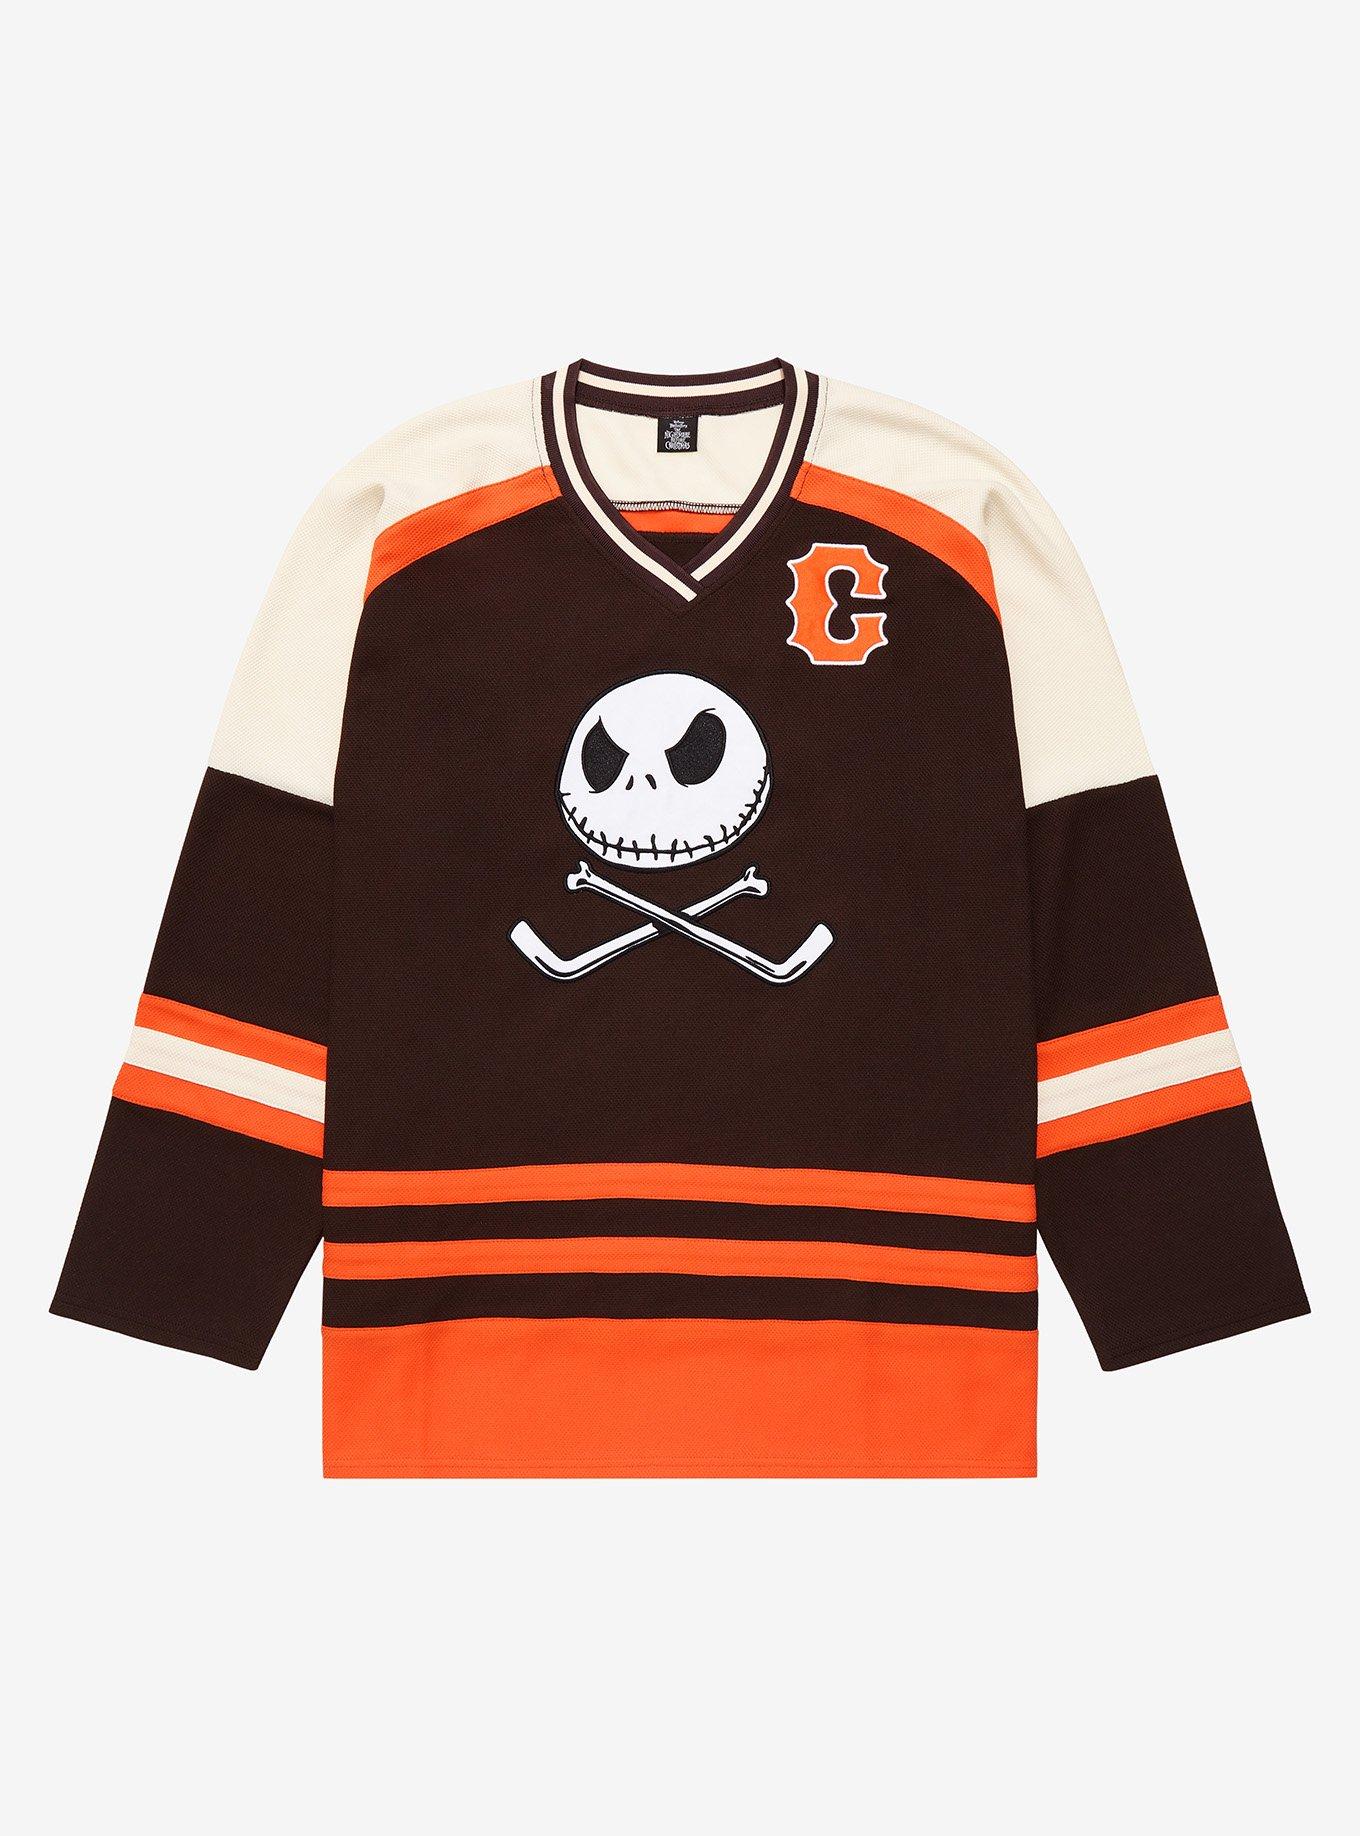 Let's get happy or angry together about every new NHL jersey